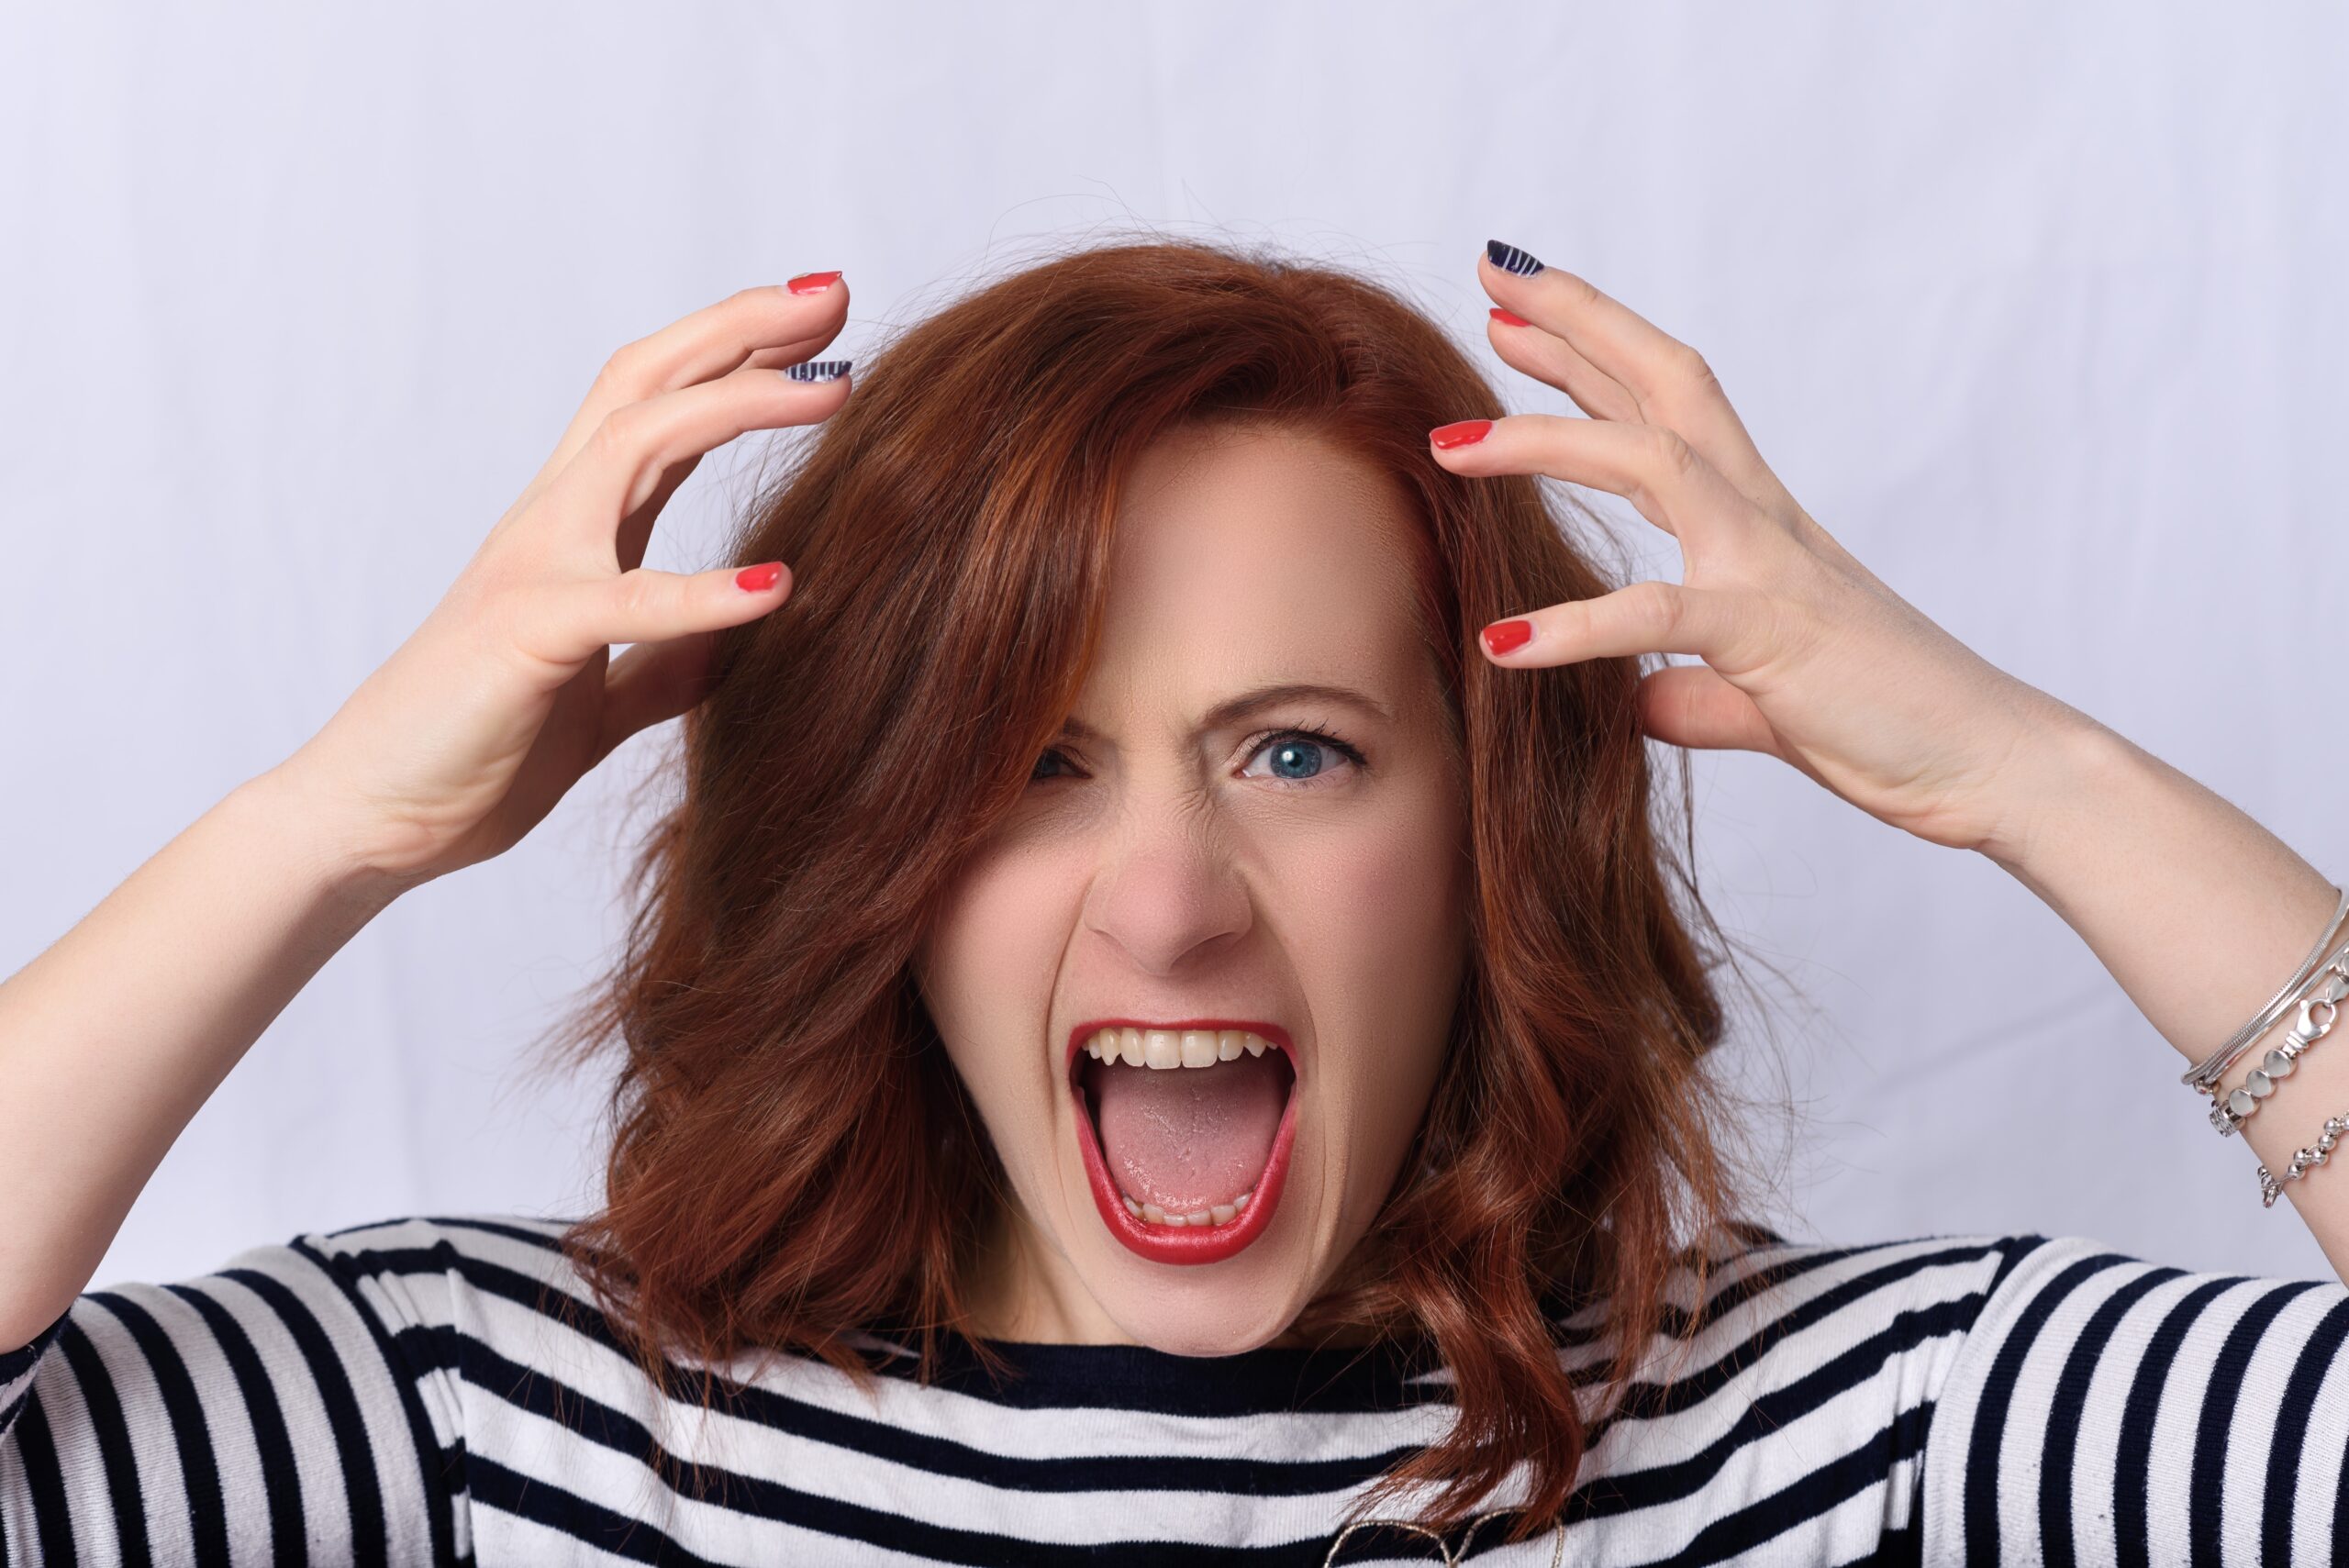 Rage, anger, and irritability during perimenopause